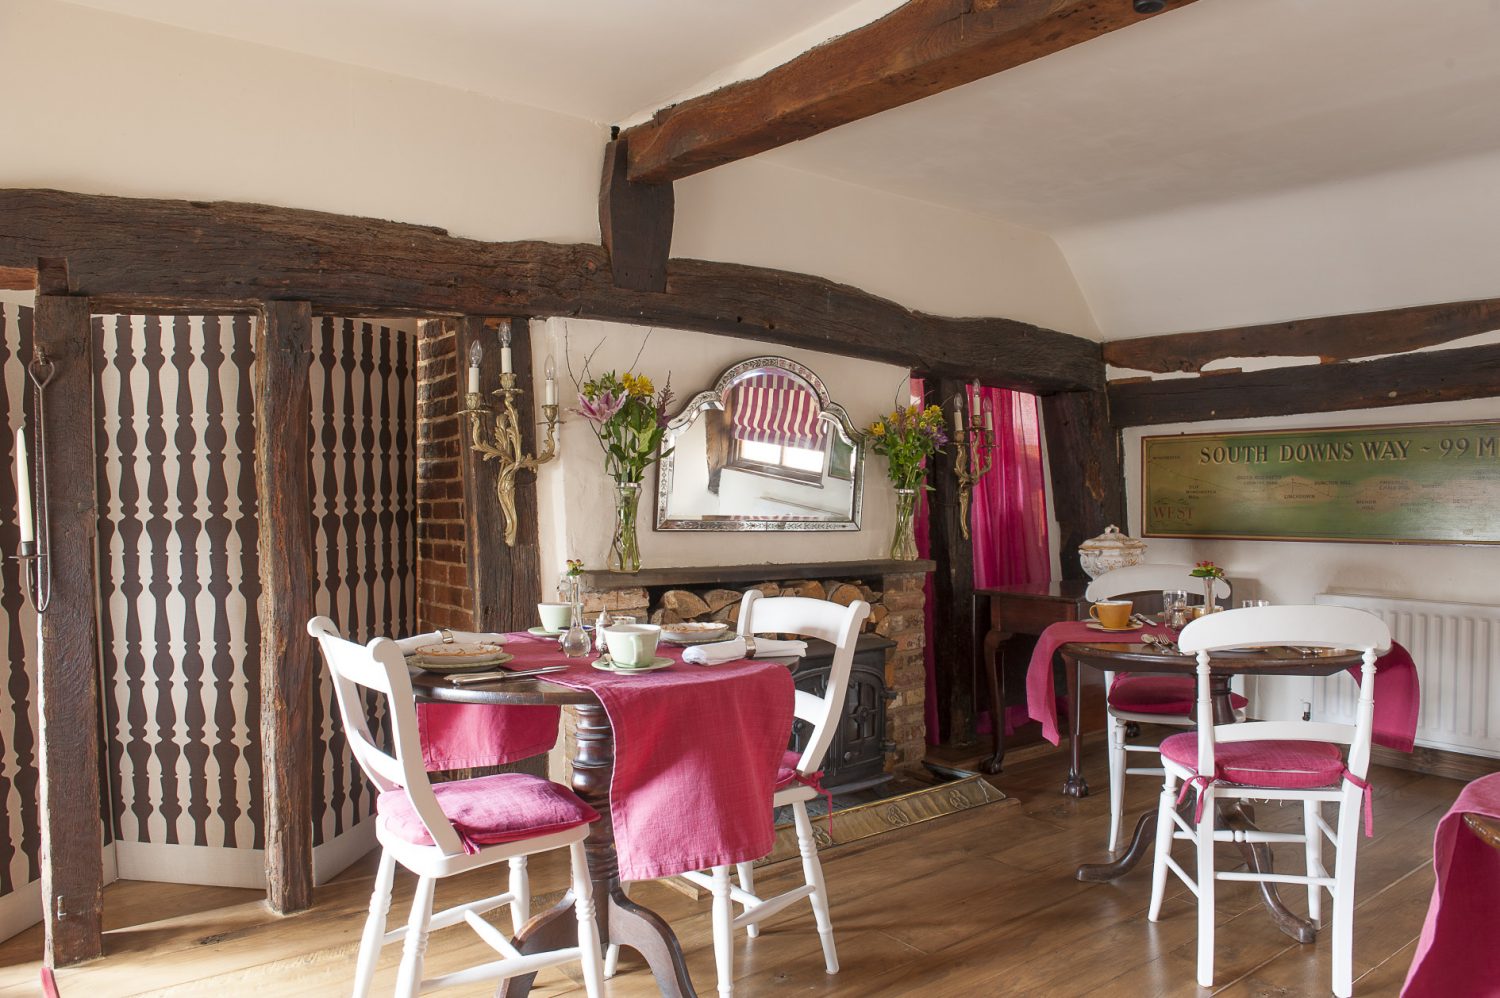 Matthew sources fresh, local ingredients to serve visitors in the cosy dining room during winter and on the open air patio in the summer months